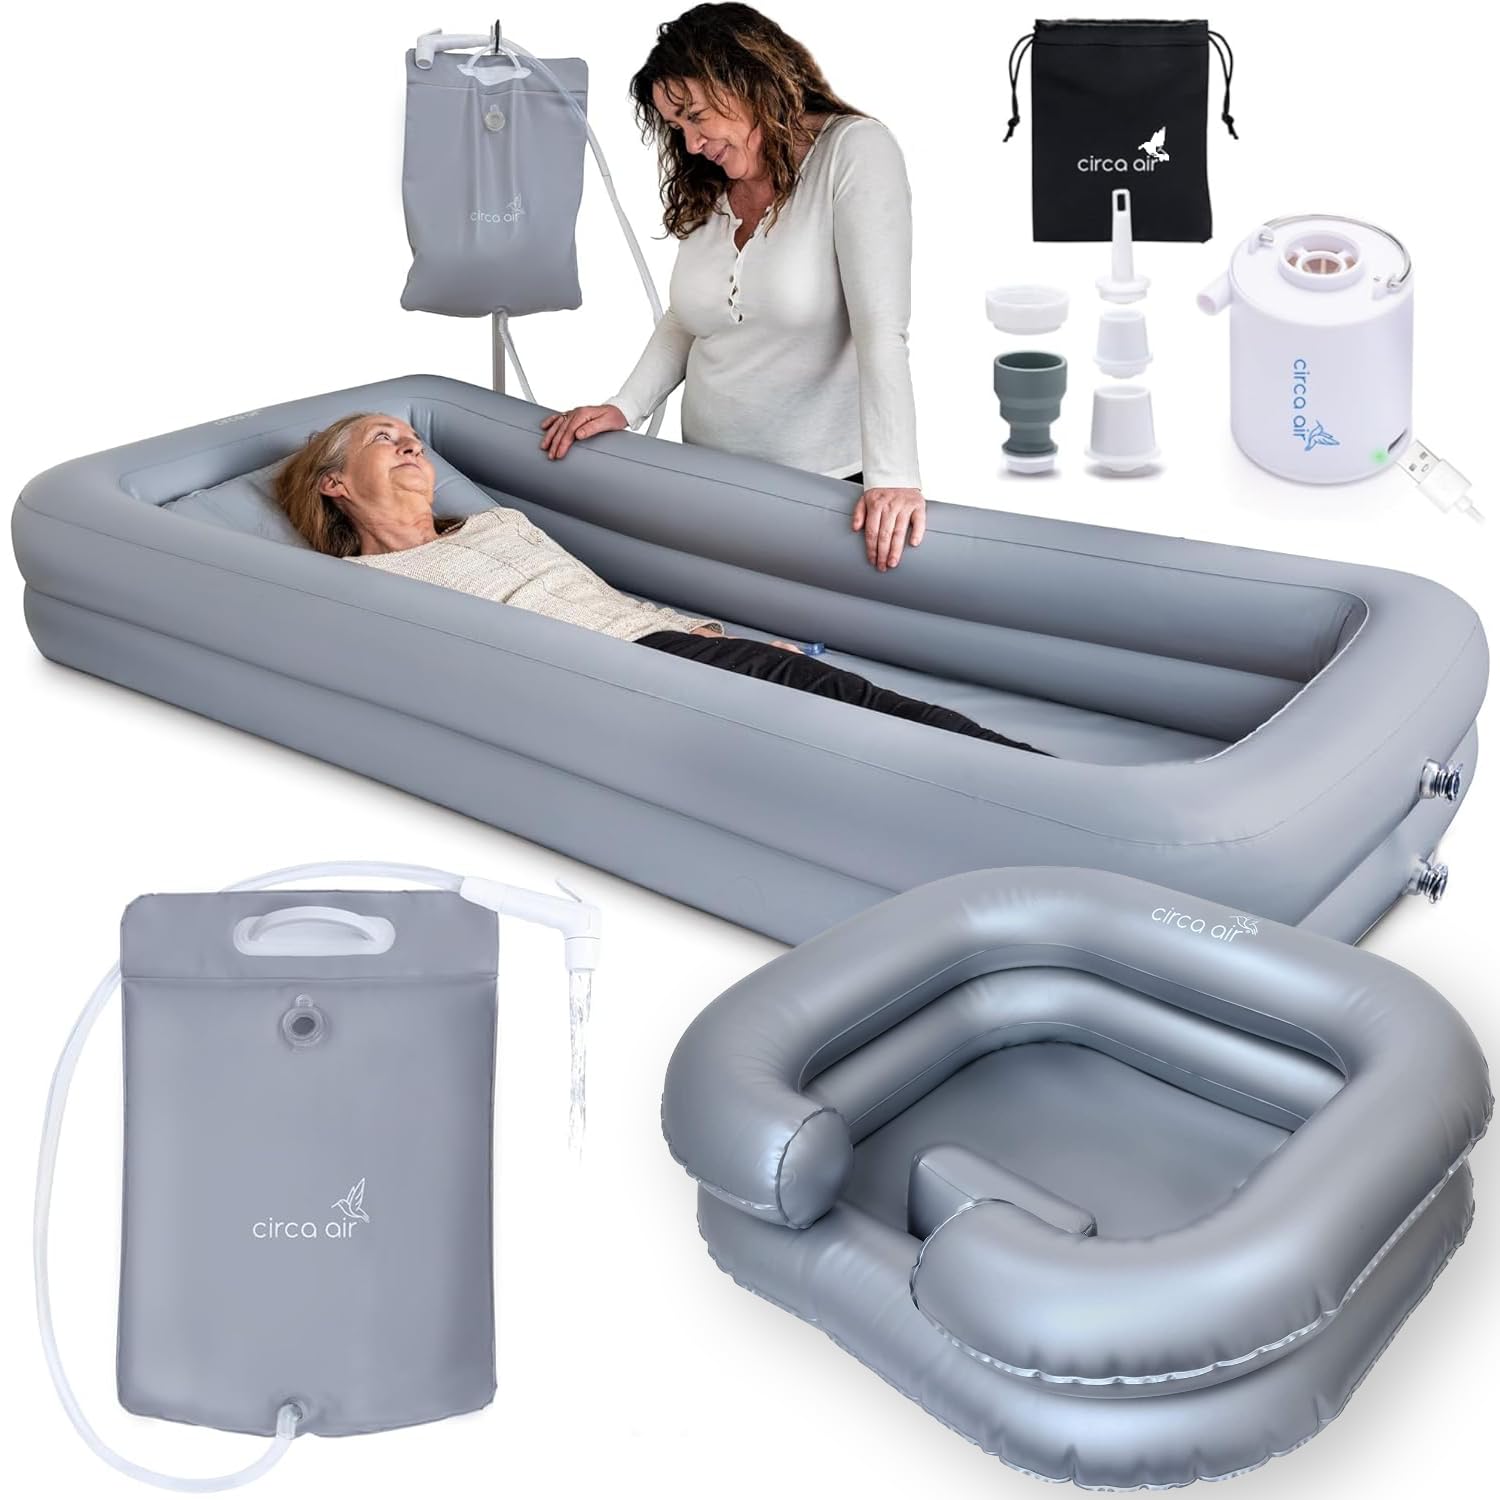 CIRCA AIR Bundle - Inflatable Bathtub and Hair Washing Basin with Shower Bag and Mini Pump - Portable Wash Station for Bedridden and Elderly